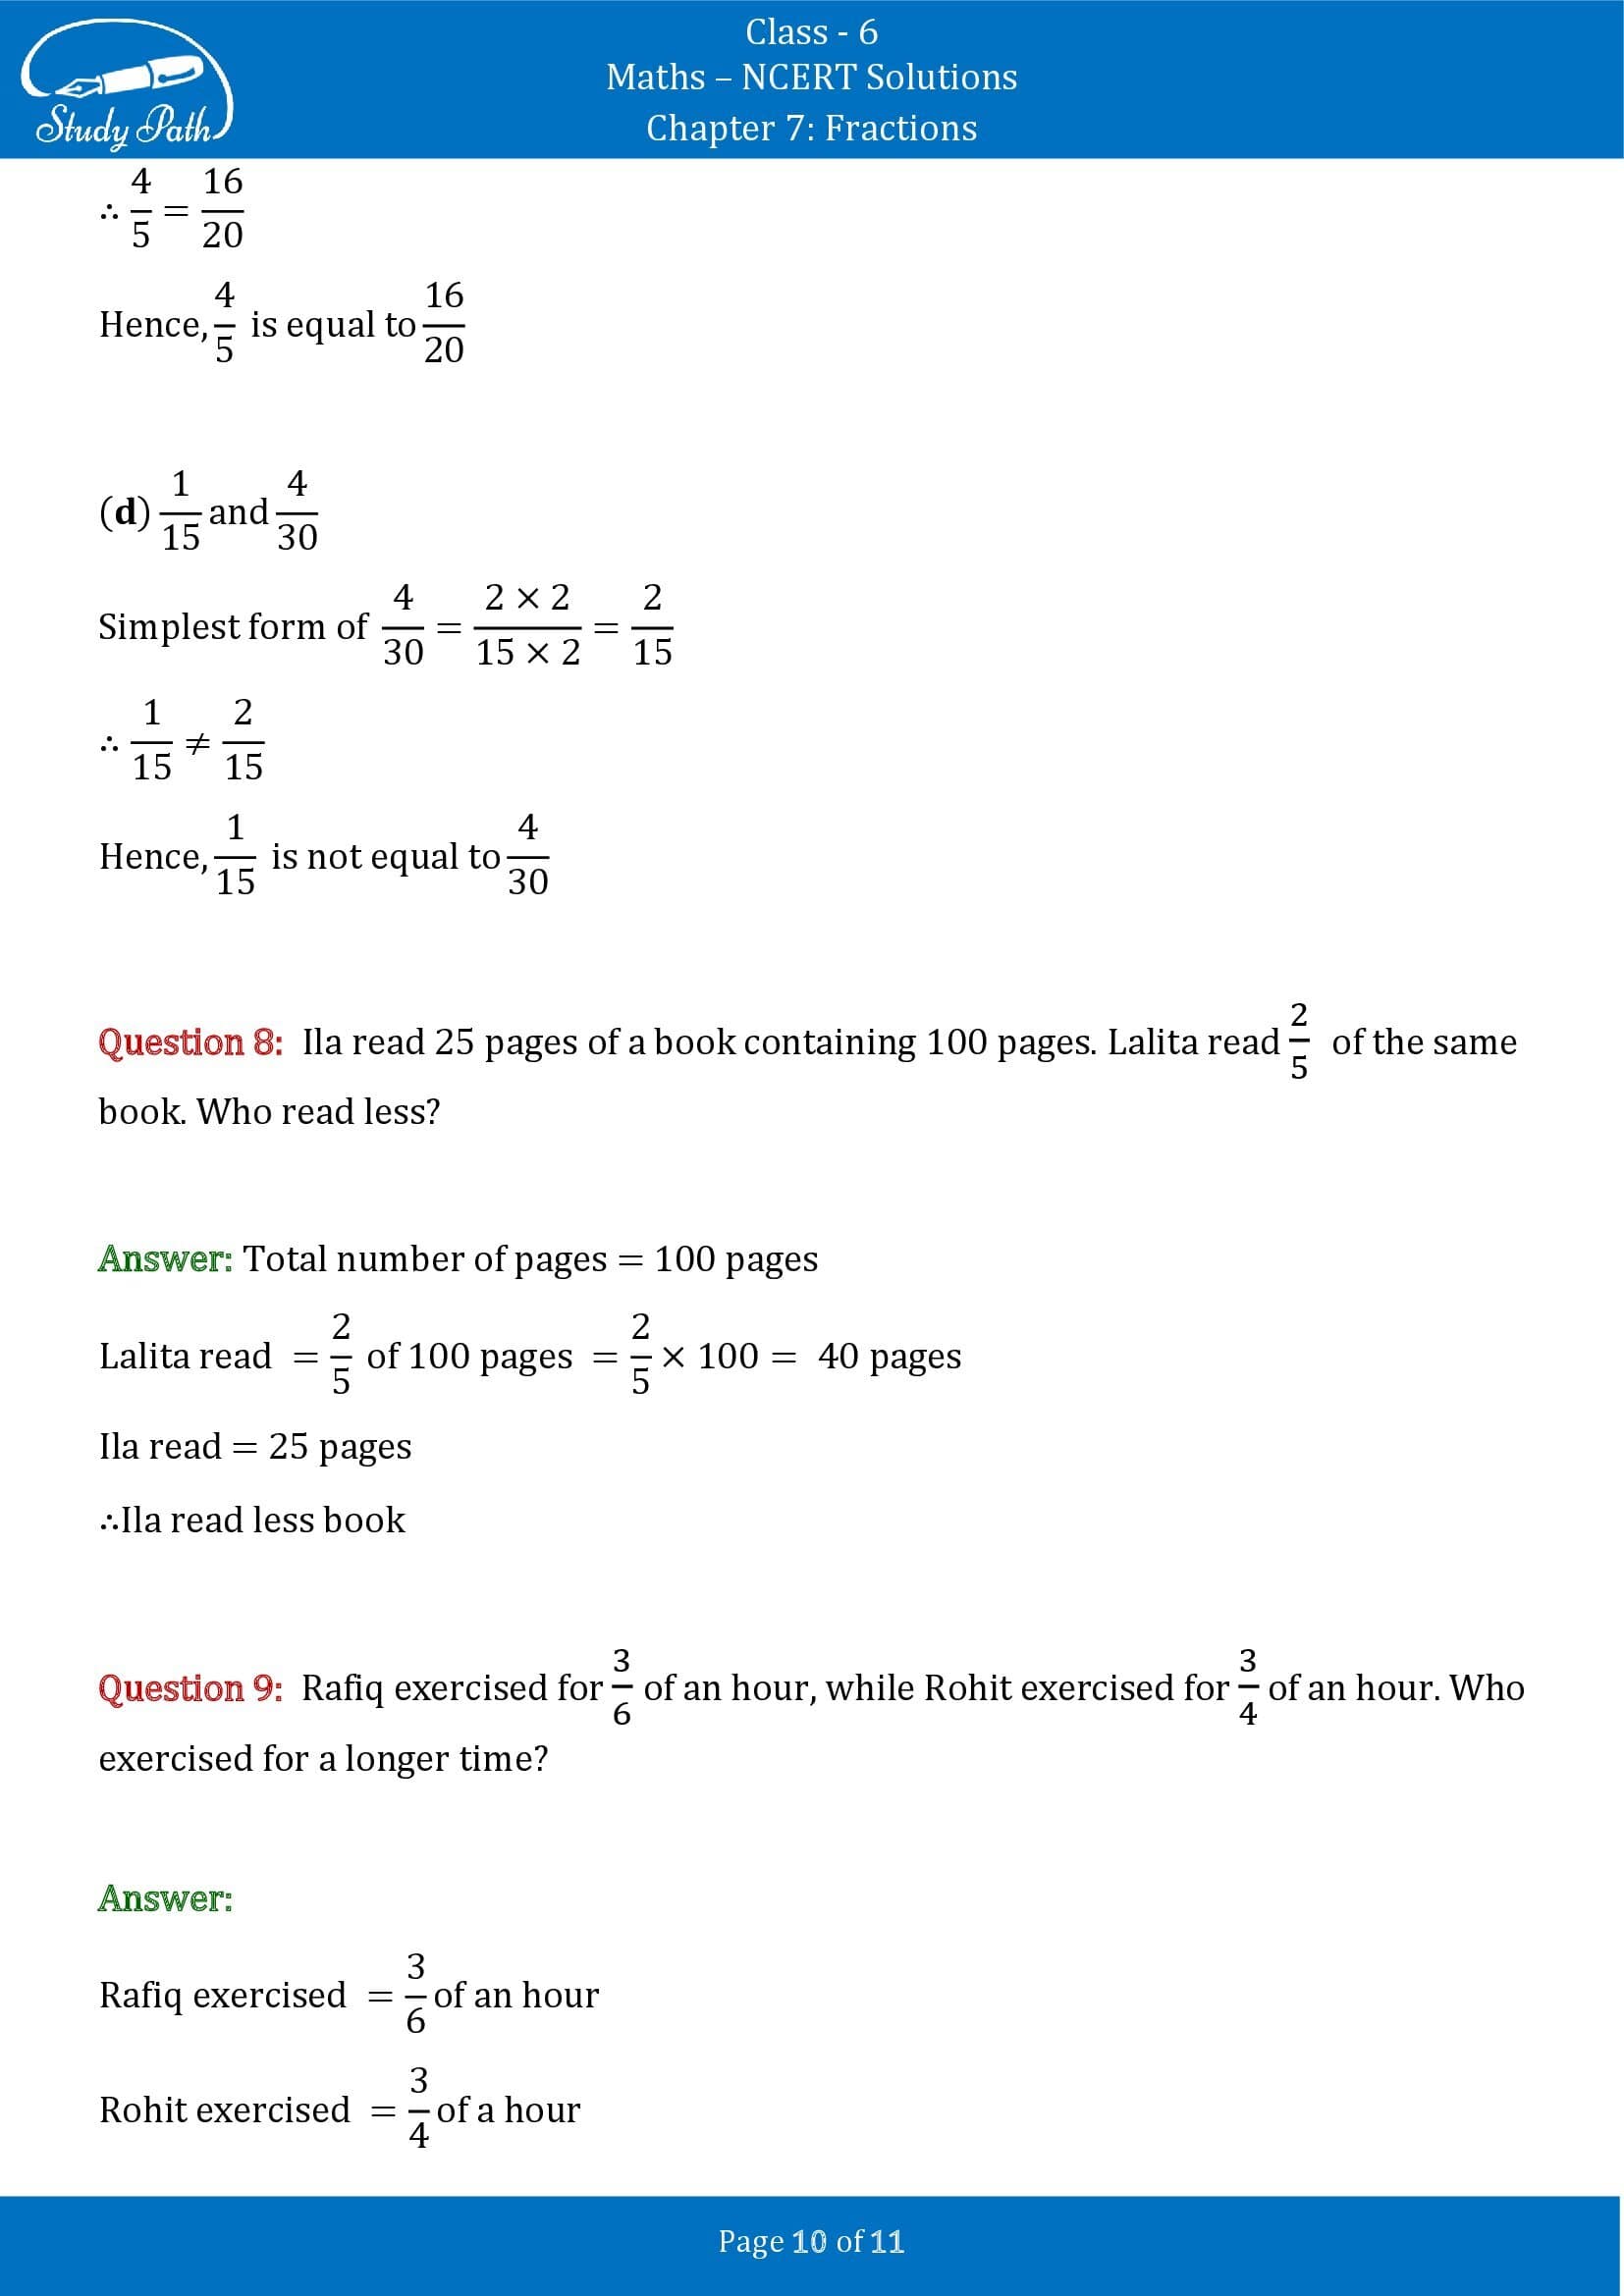 NCERT Solutions for Class 6 Maths Chapter 7 Fractions Exercise 7.4 00010